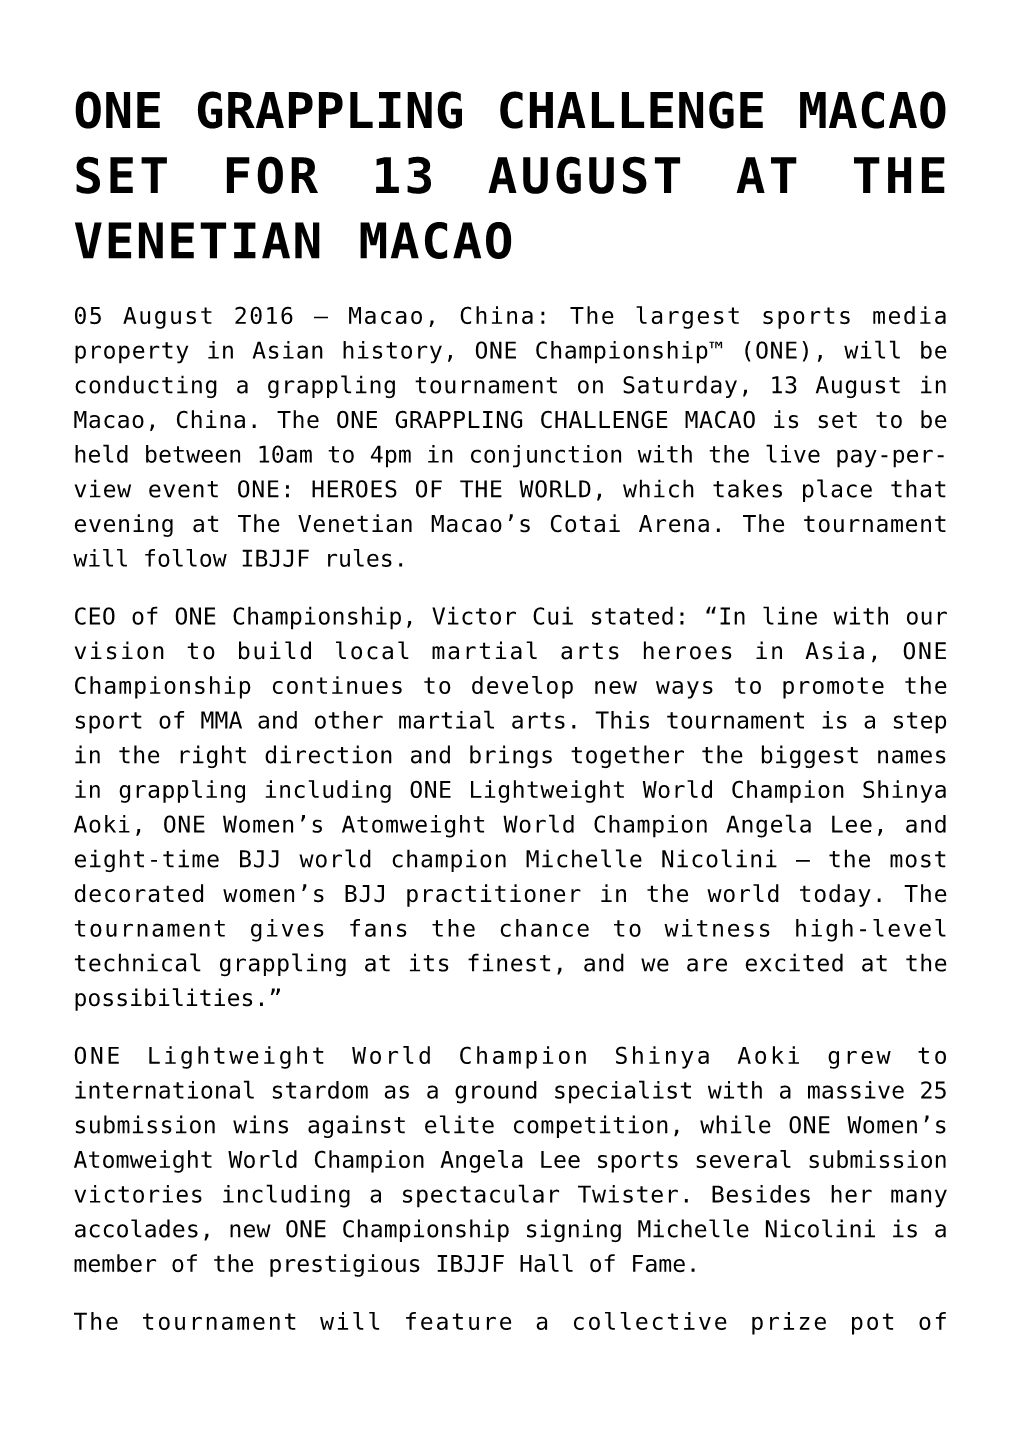 One Grappling Challenge Macao Set for 13 August at the Venetian Macao